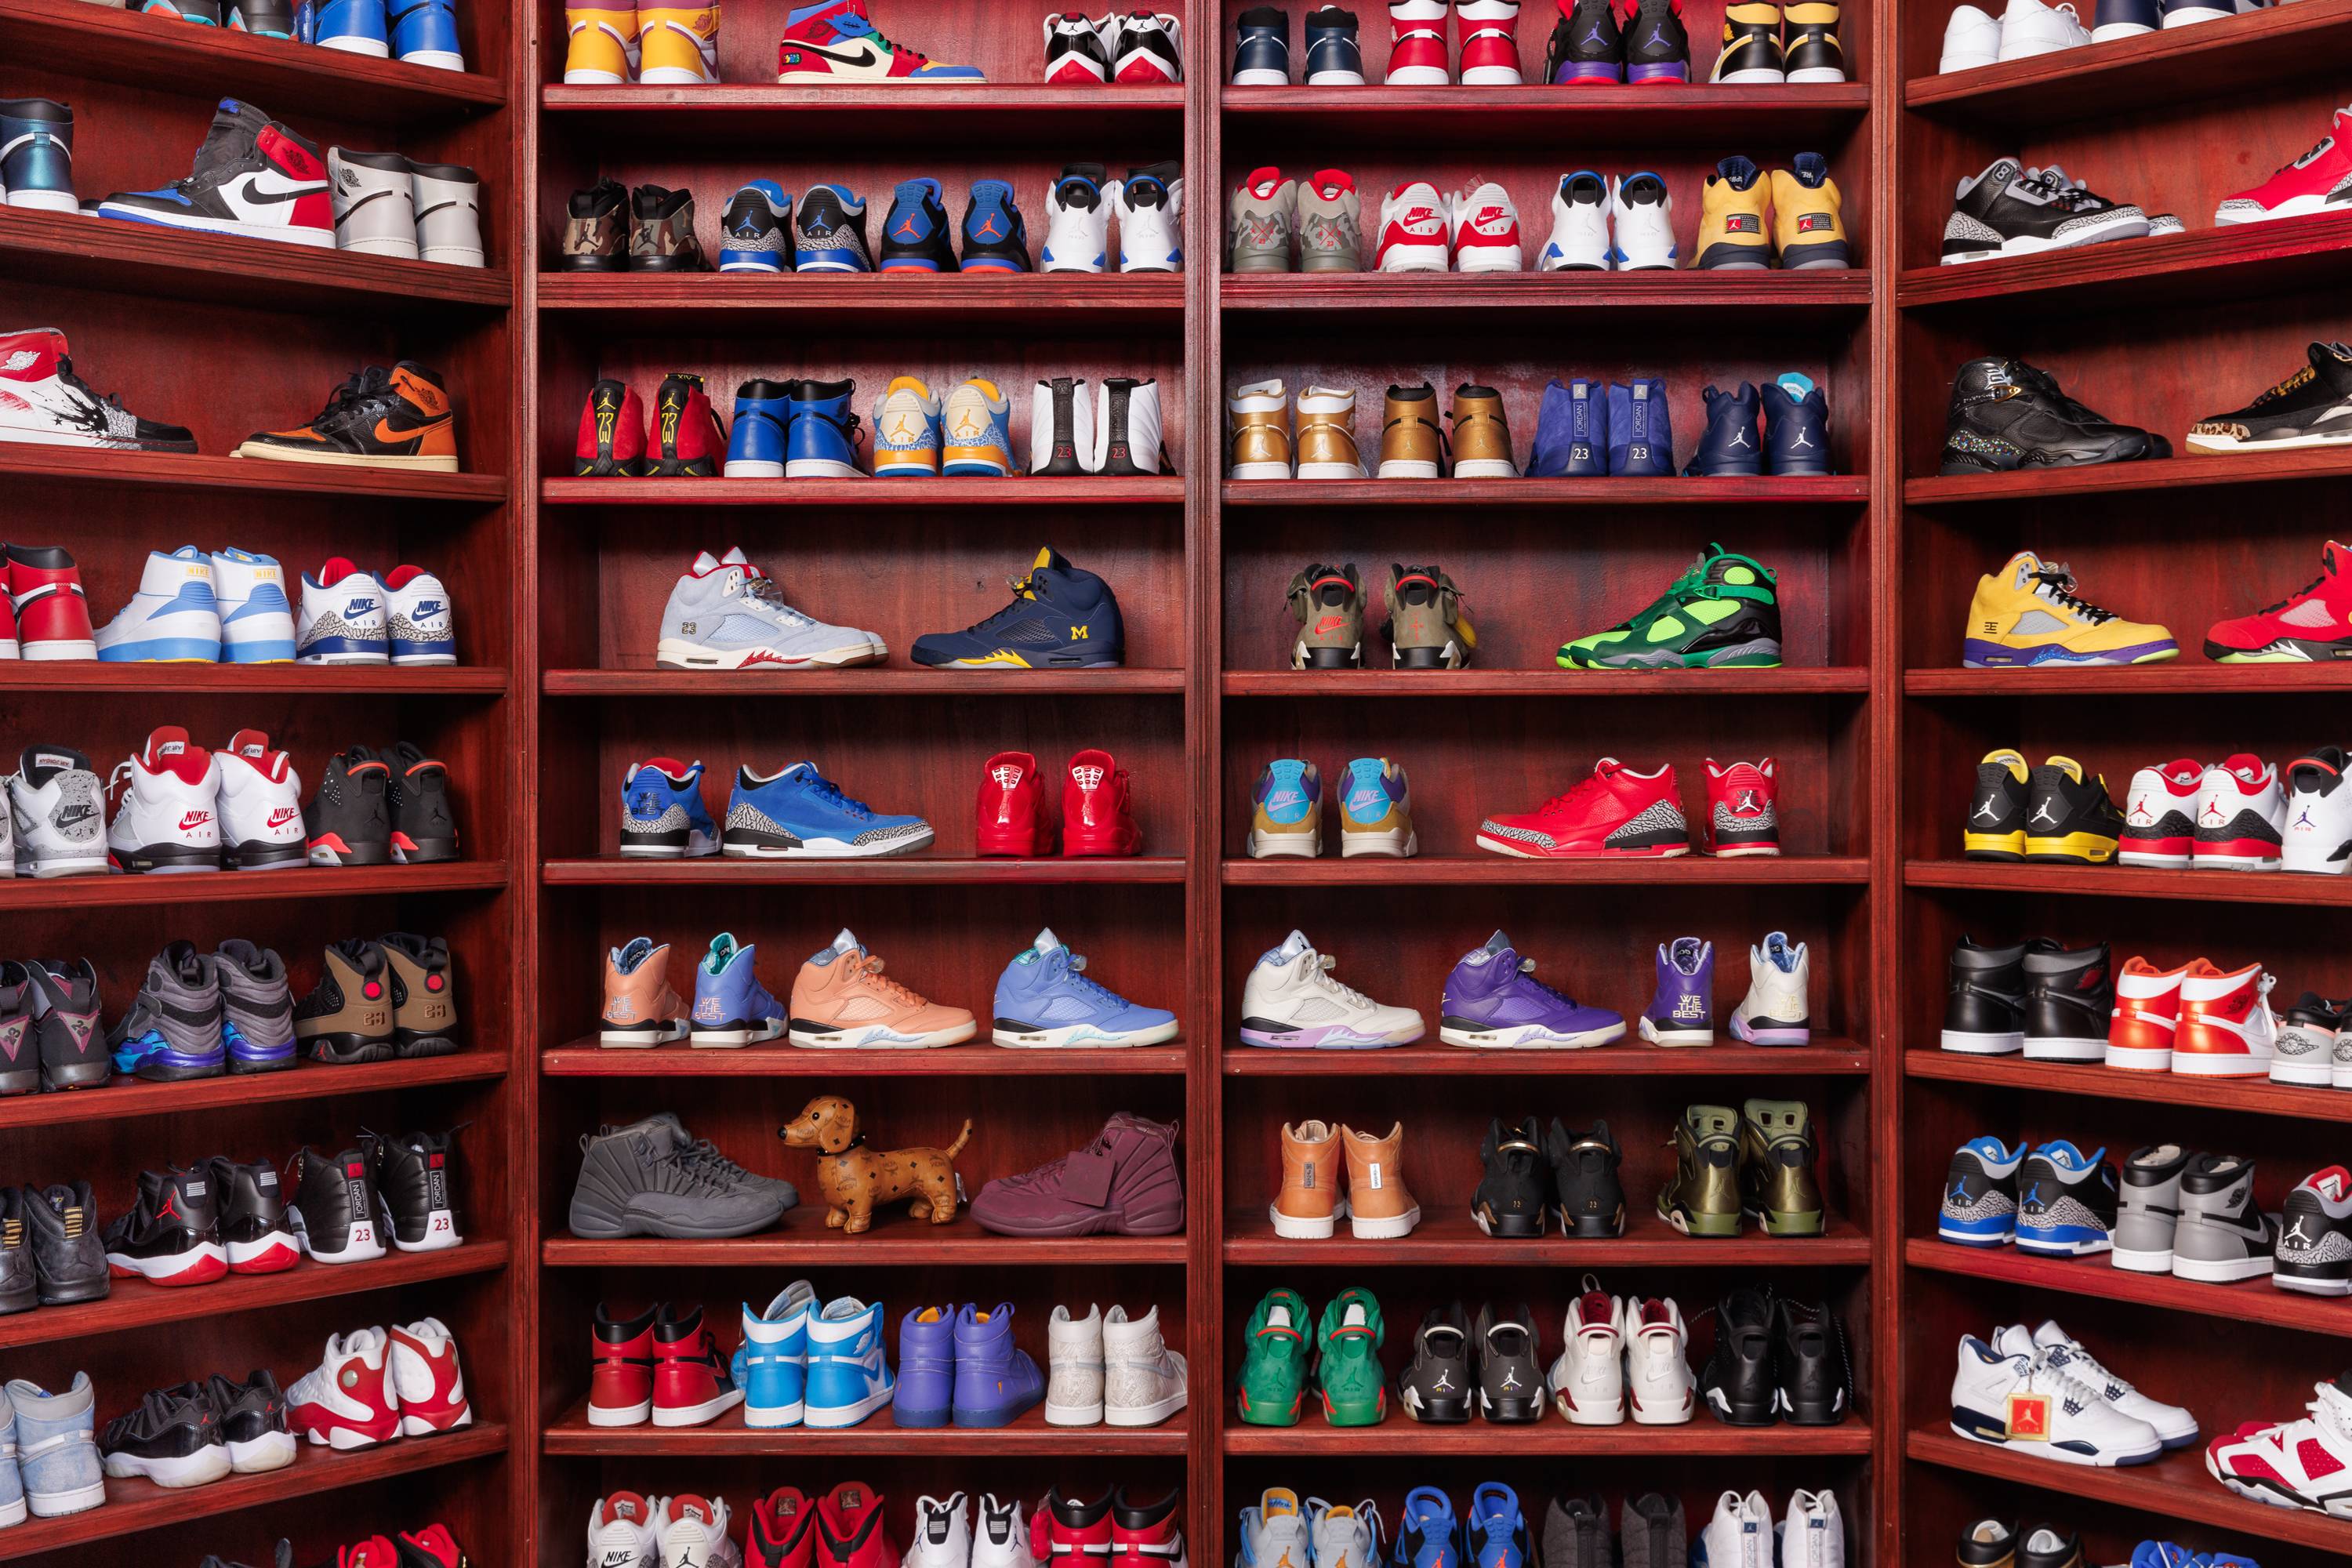 You can now book an Airbnb at DJ Khaled's epic Miami shoe closet